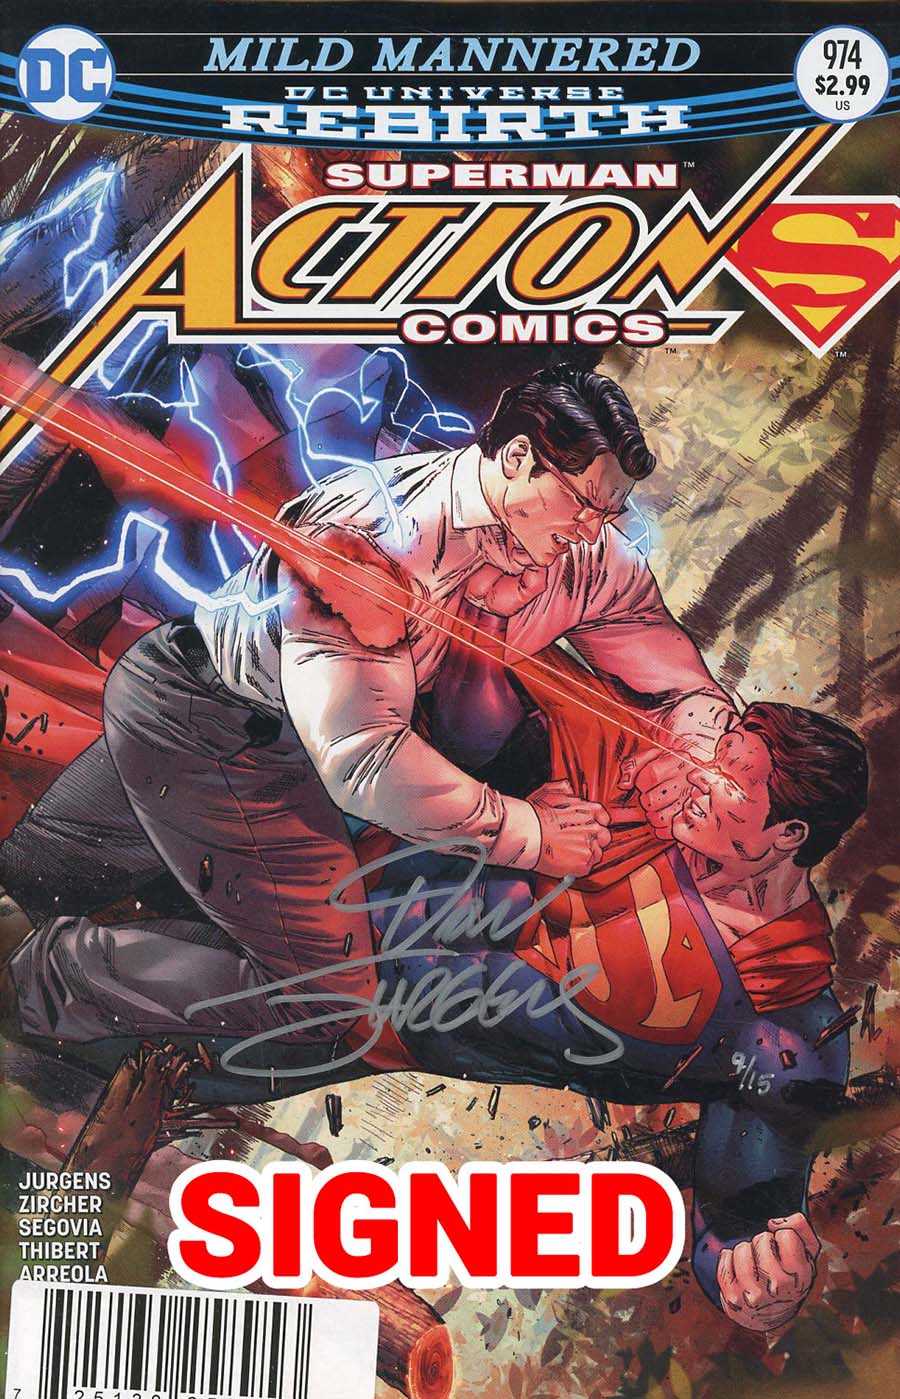 Action Comics Vol 2 #974 Cover C DF Ultra Limited Silver Signature Series Signed By Dan Jurgens